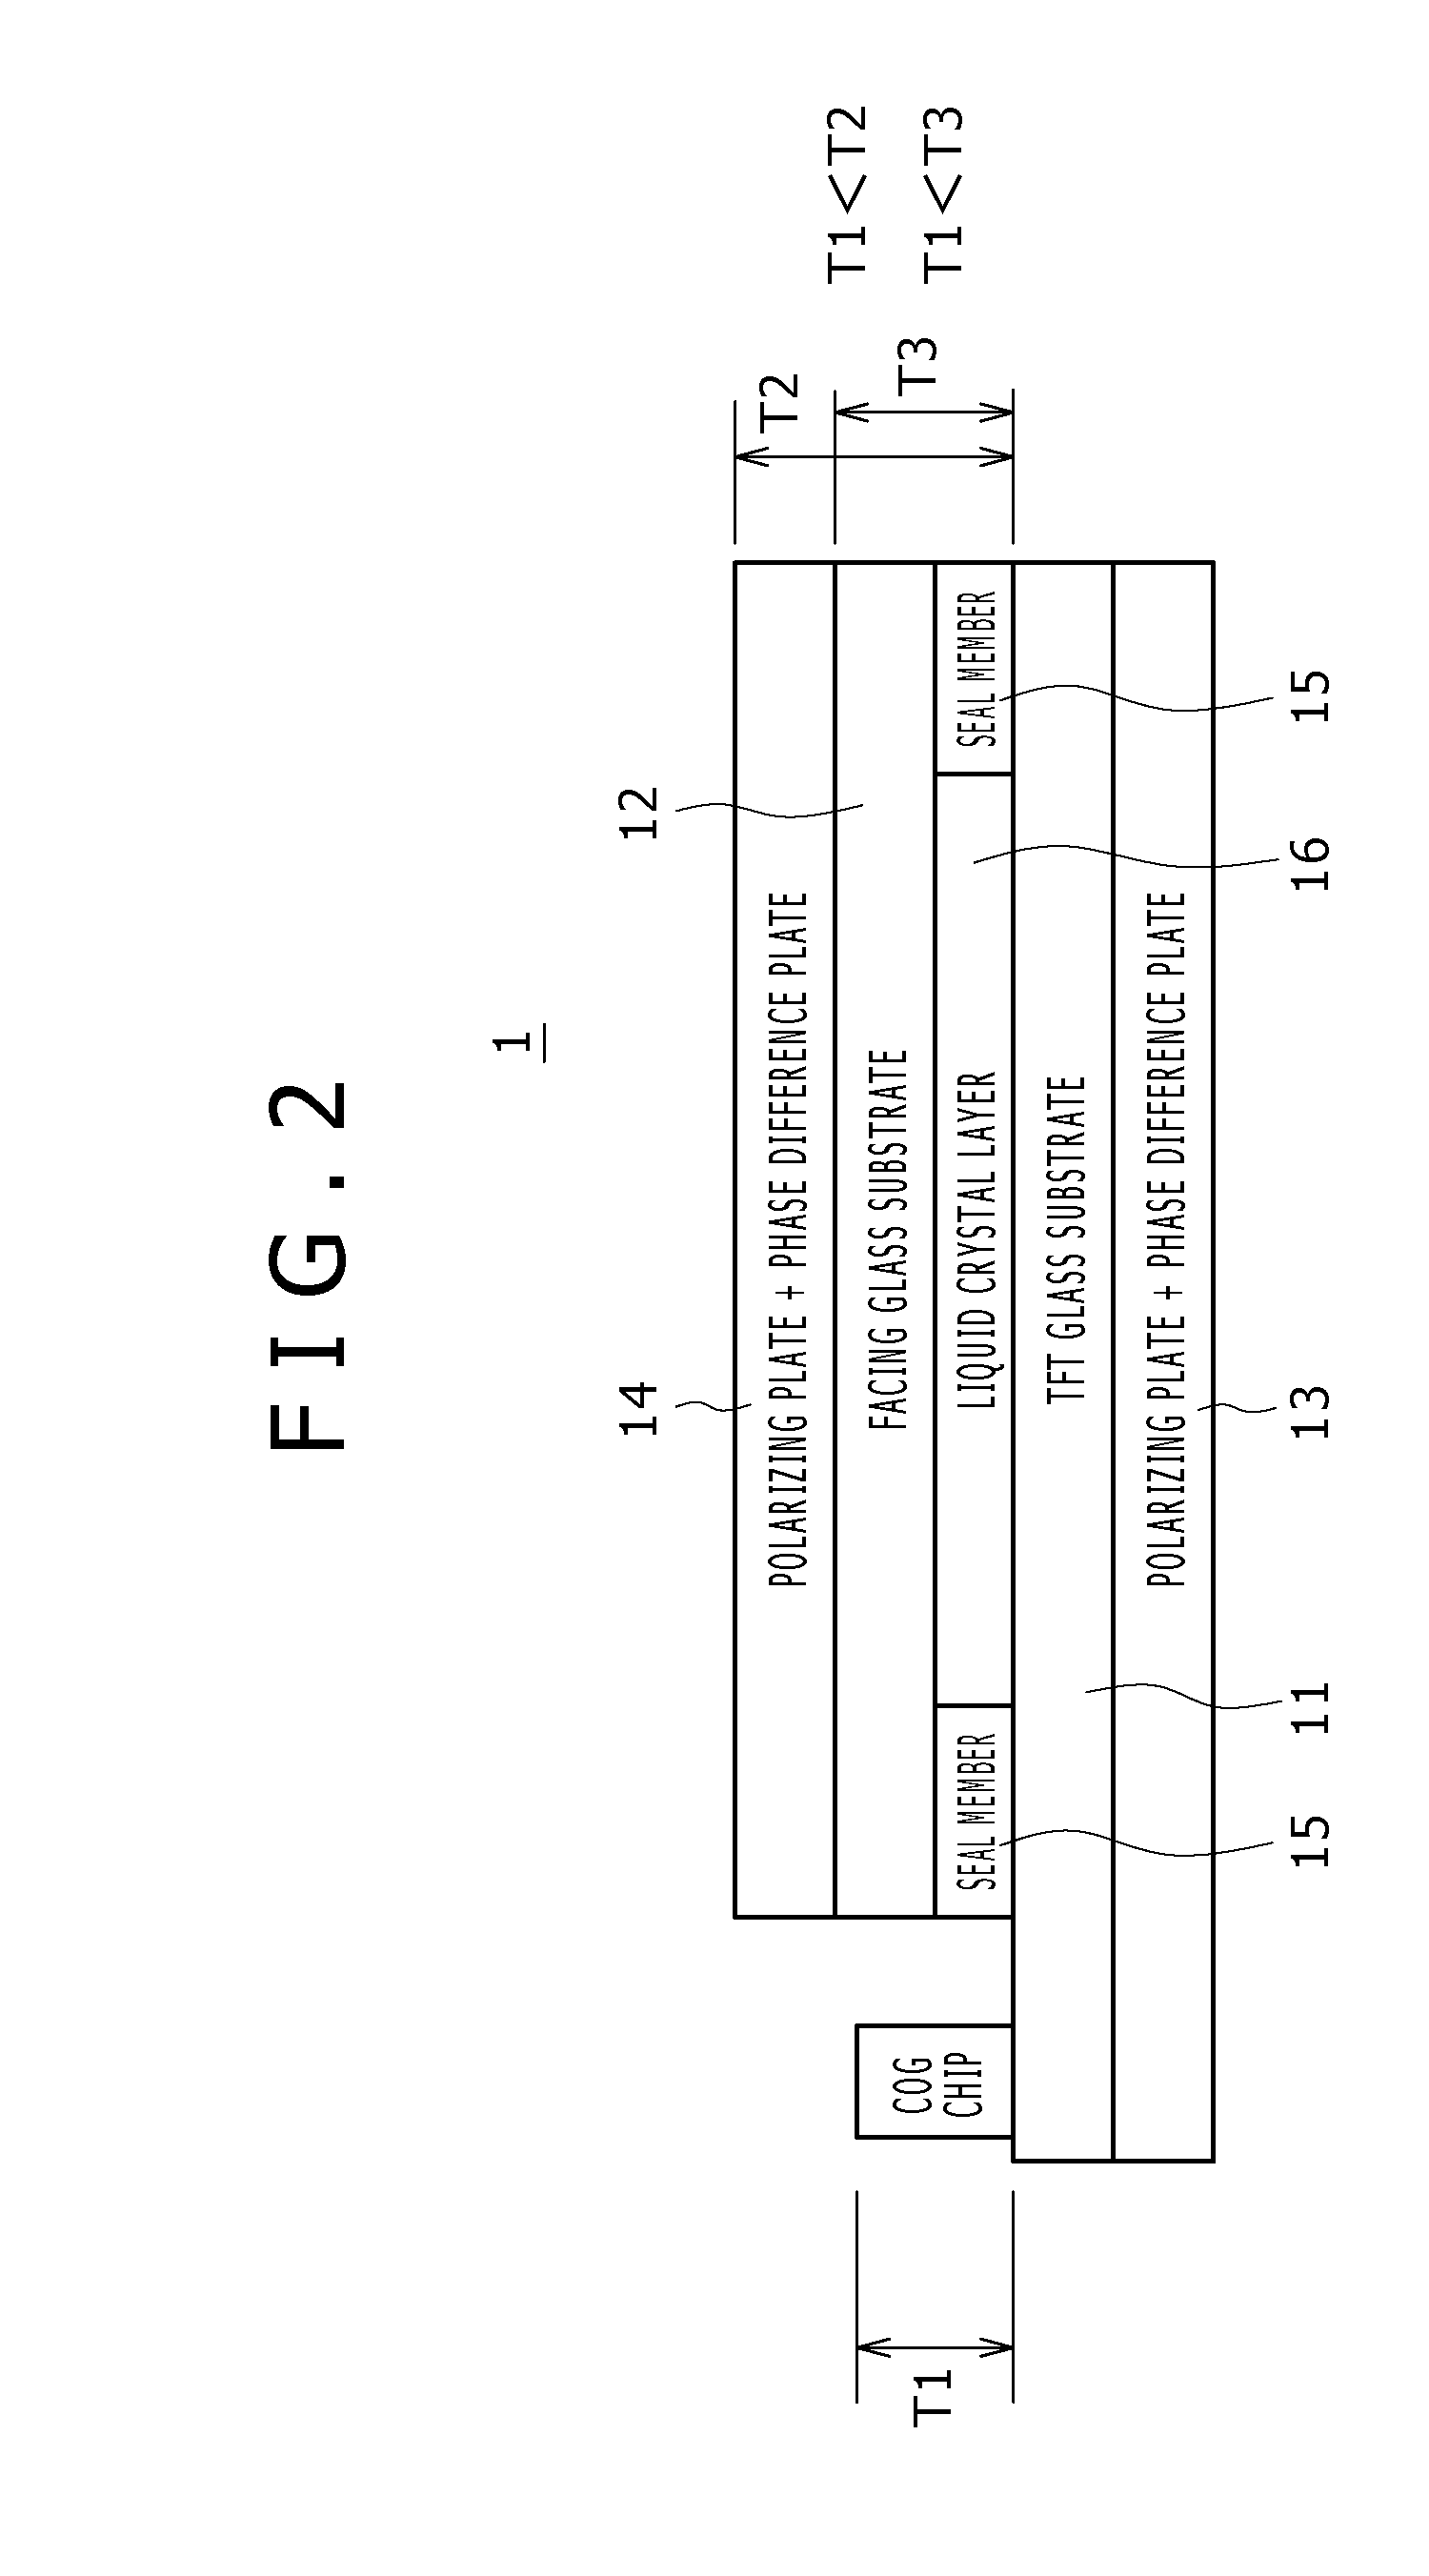 Display device comprising a protective fixing member disposed only about a periphery of a semiconductor chip wherein a top side and a bottom side are co-planar with a respective top side and a bottom side of the semiconductor chip